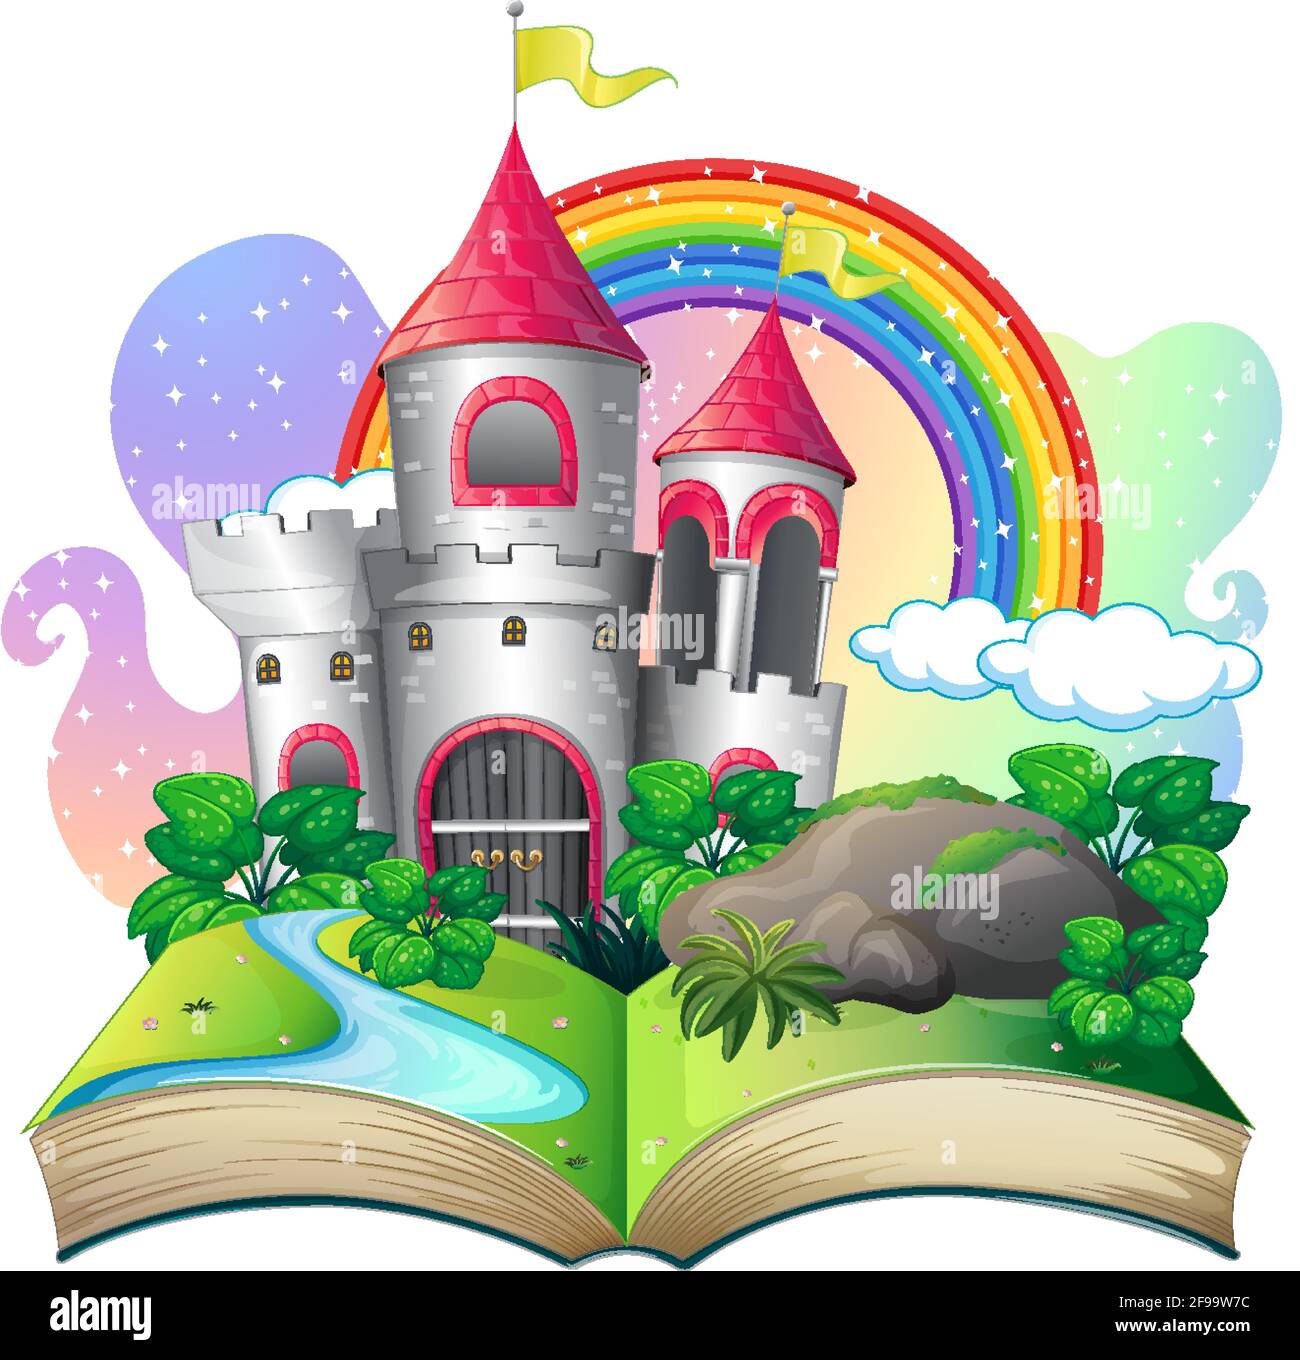 3D pop up book with castle fairy tale theme illustration Stock Vector